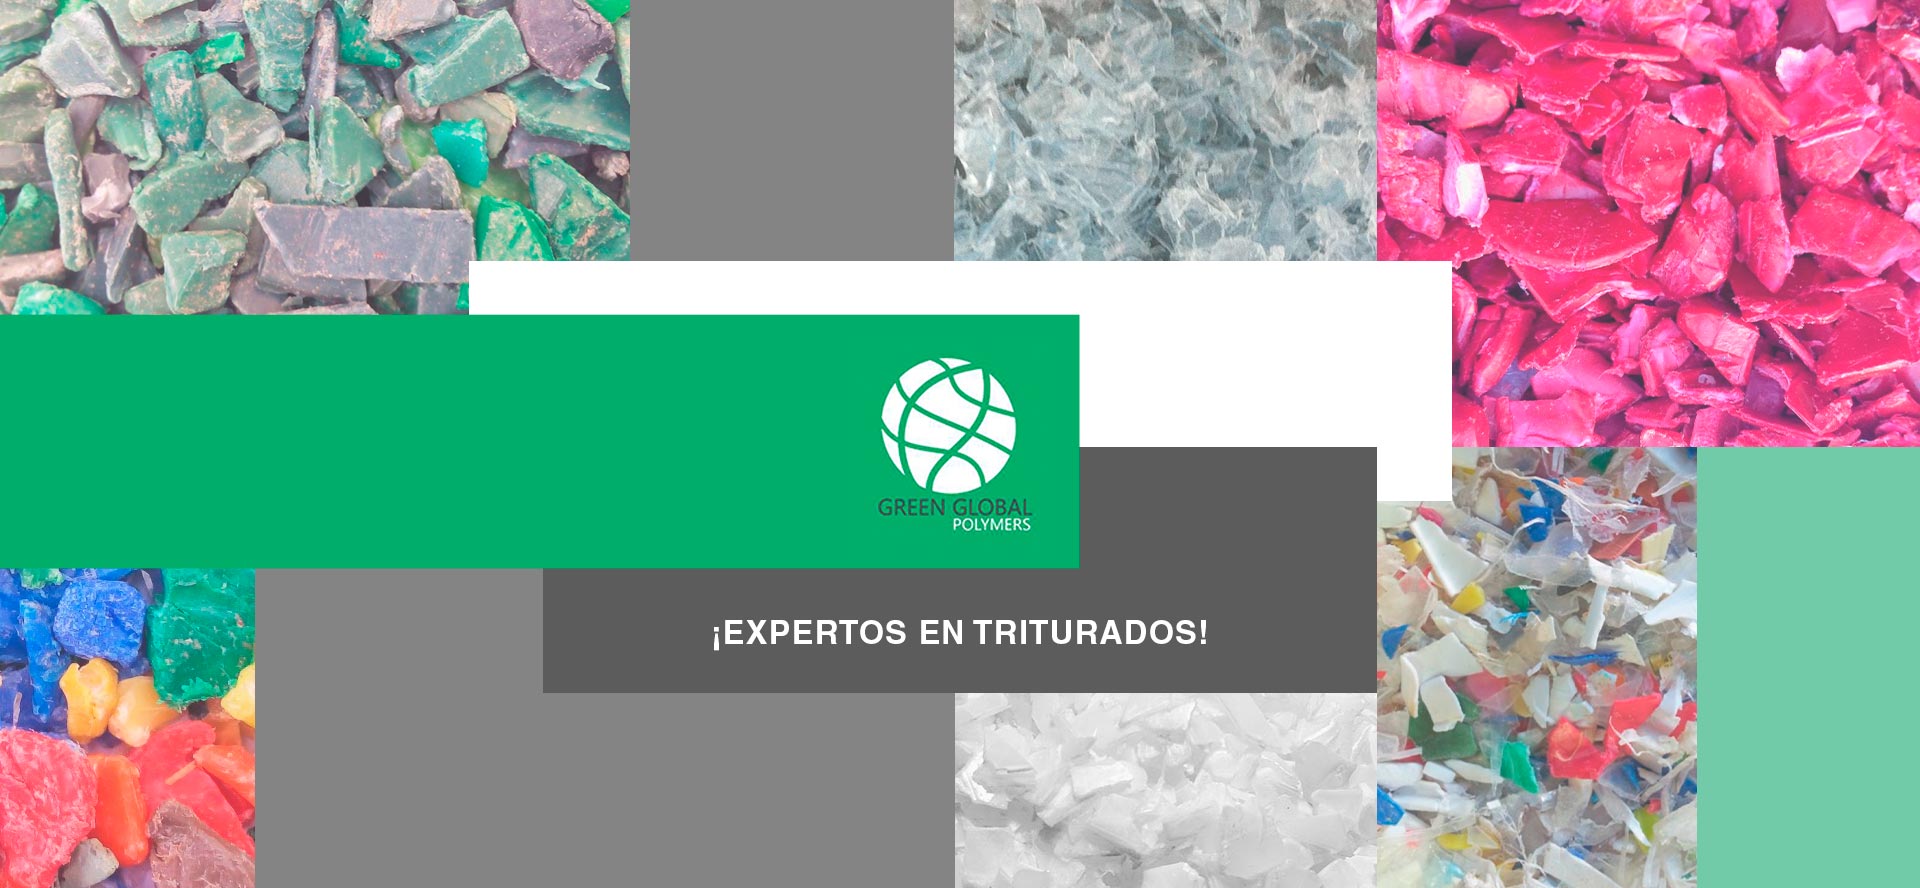 Green Global Polymers